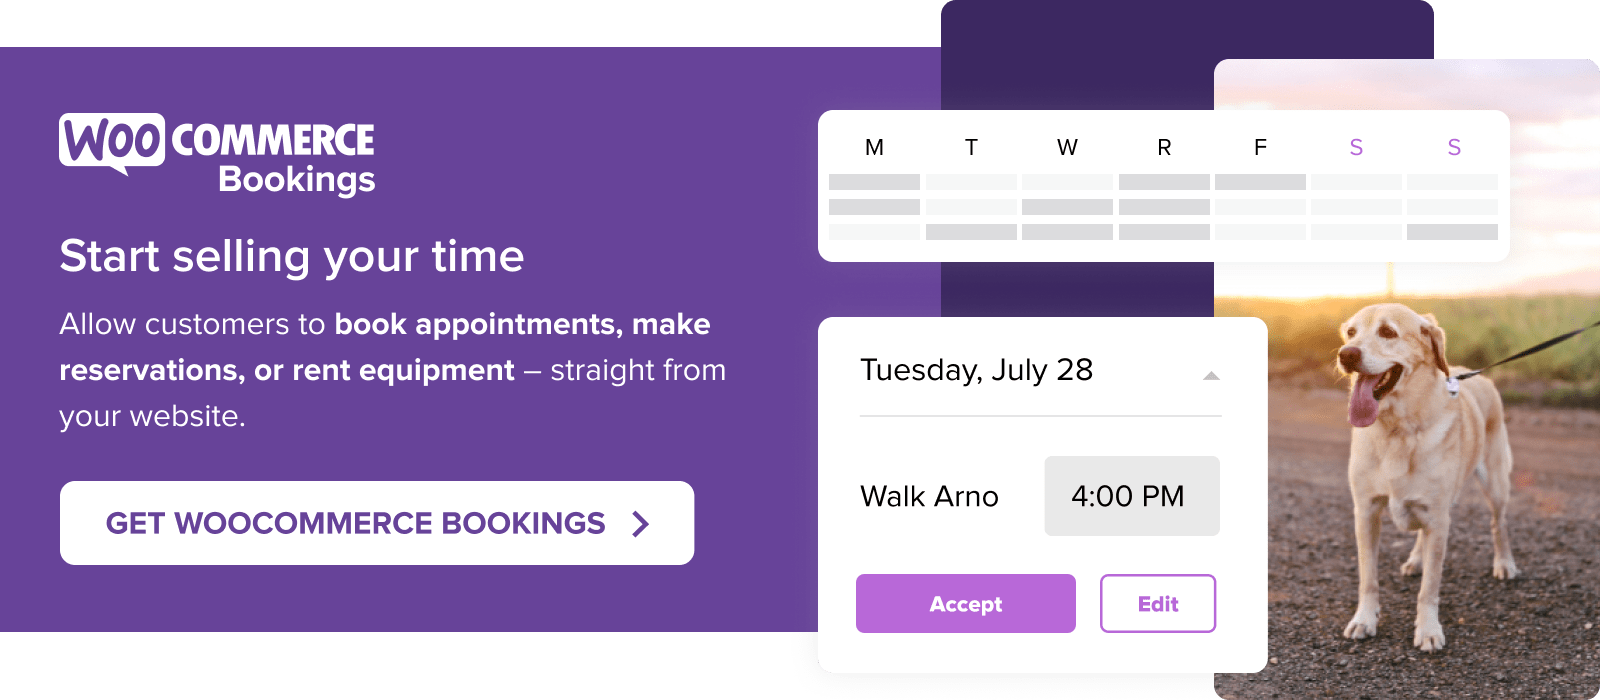 Start taking reservations and appointments with WooCommerce Bookings